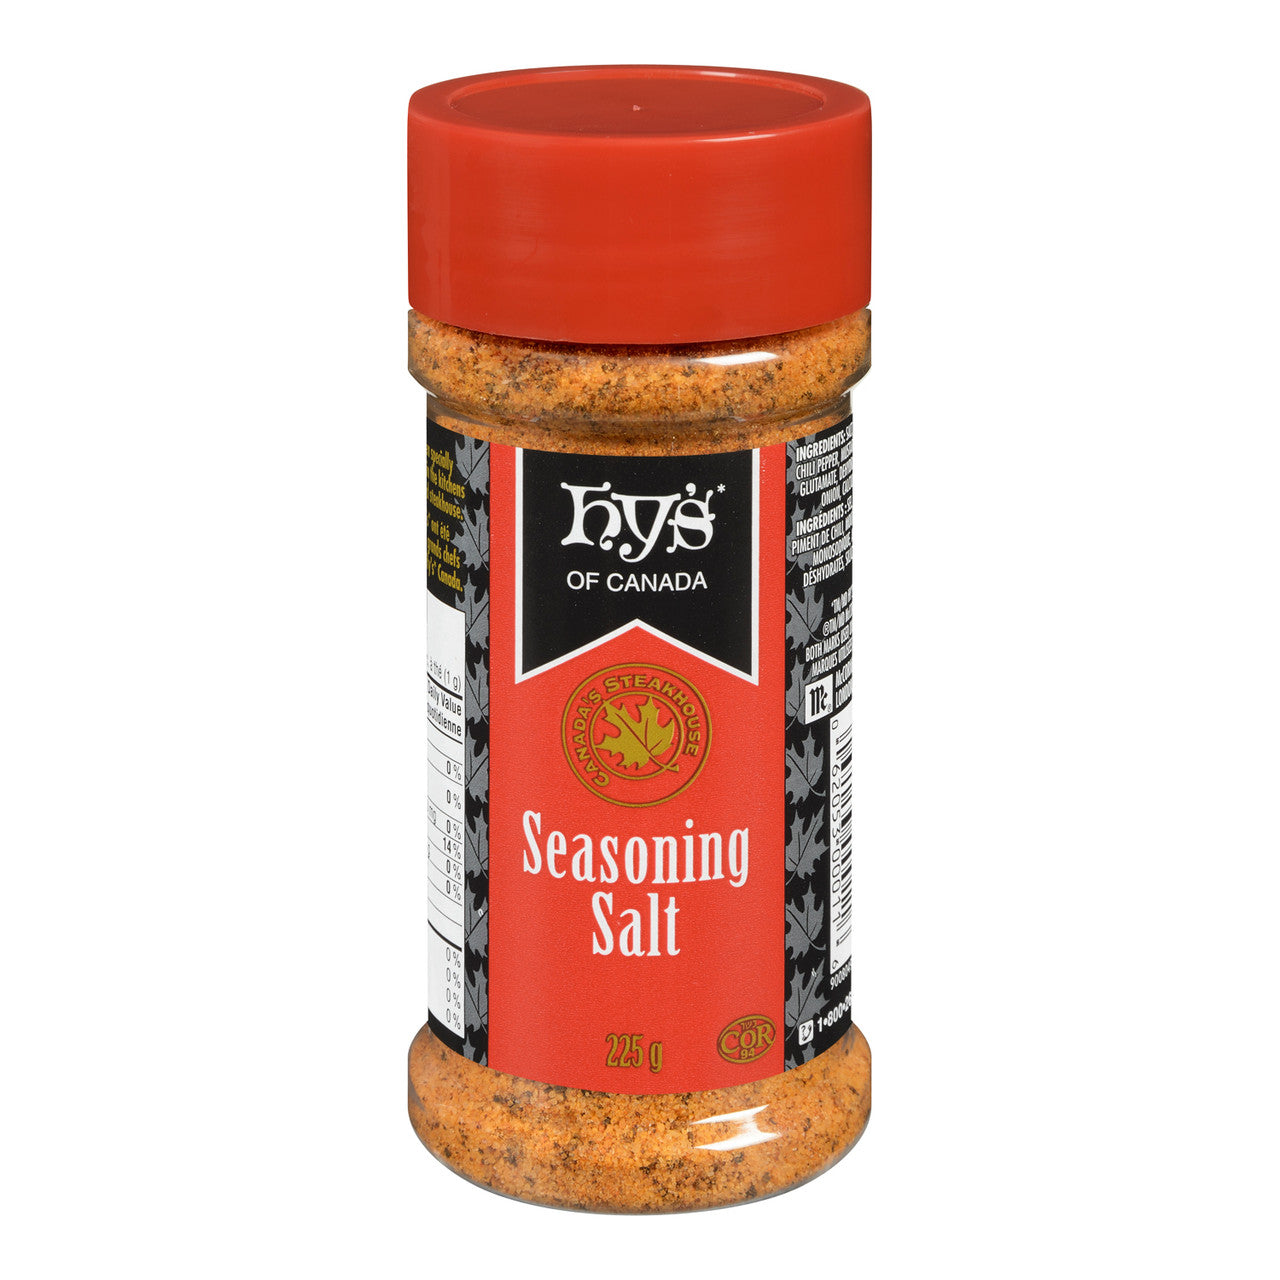 Hy's of Canada Seasoning Salt 225g/7.93oz. {Imported from Canada}